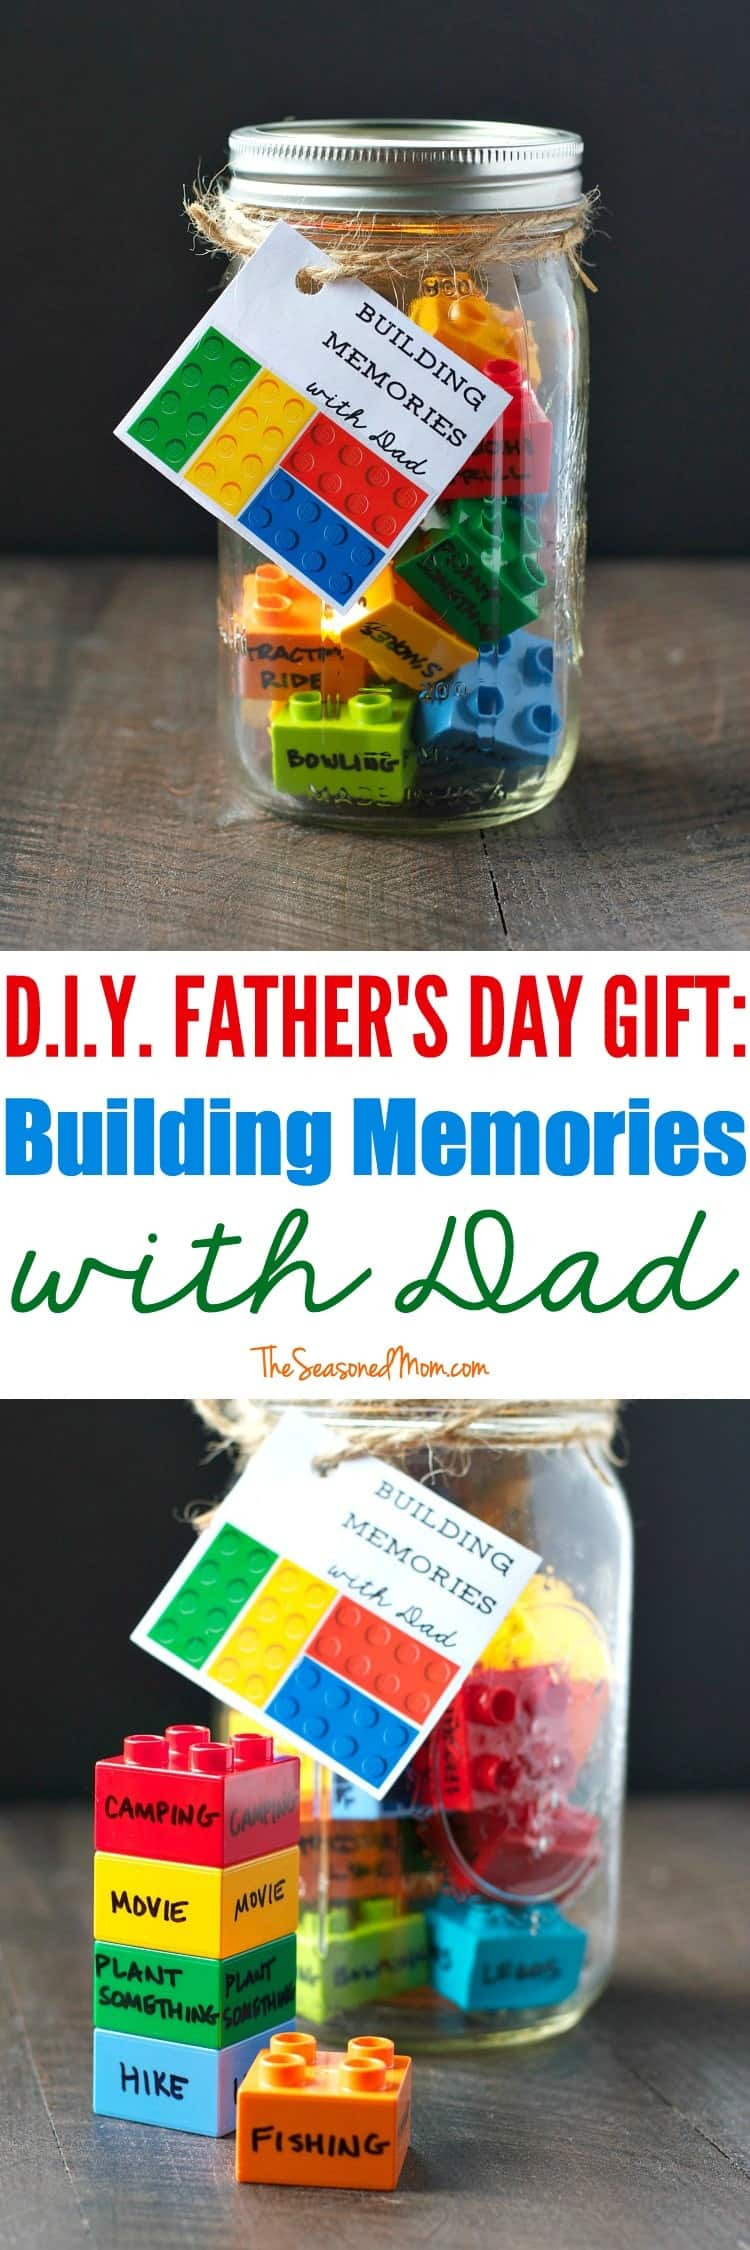 Diy Fathers Day Gifts
 DIY Father s Day Gift Building Memories with Dad The